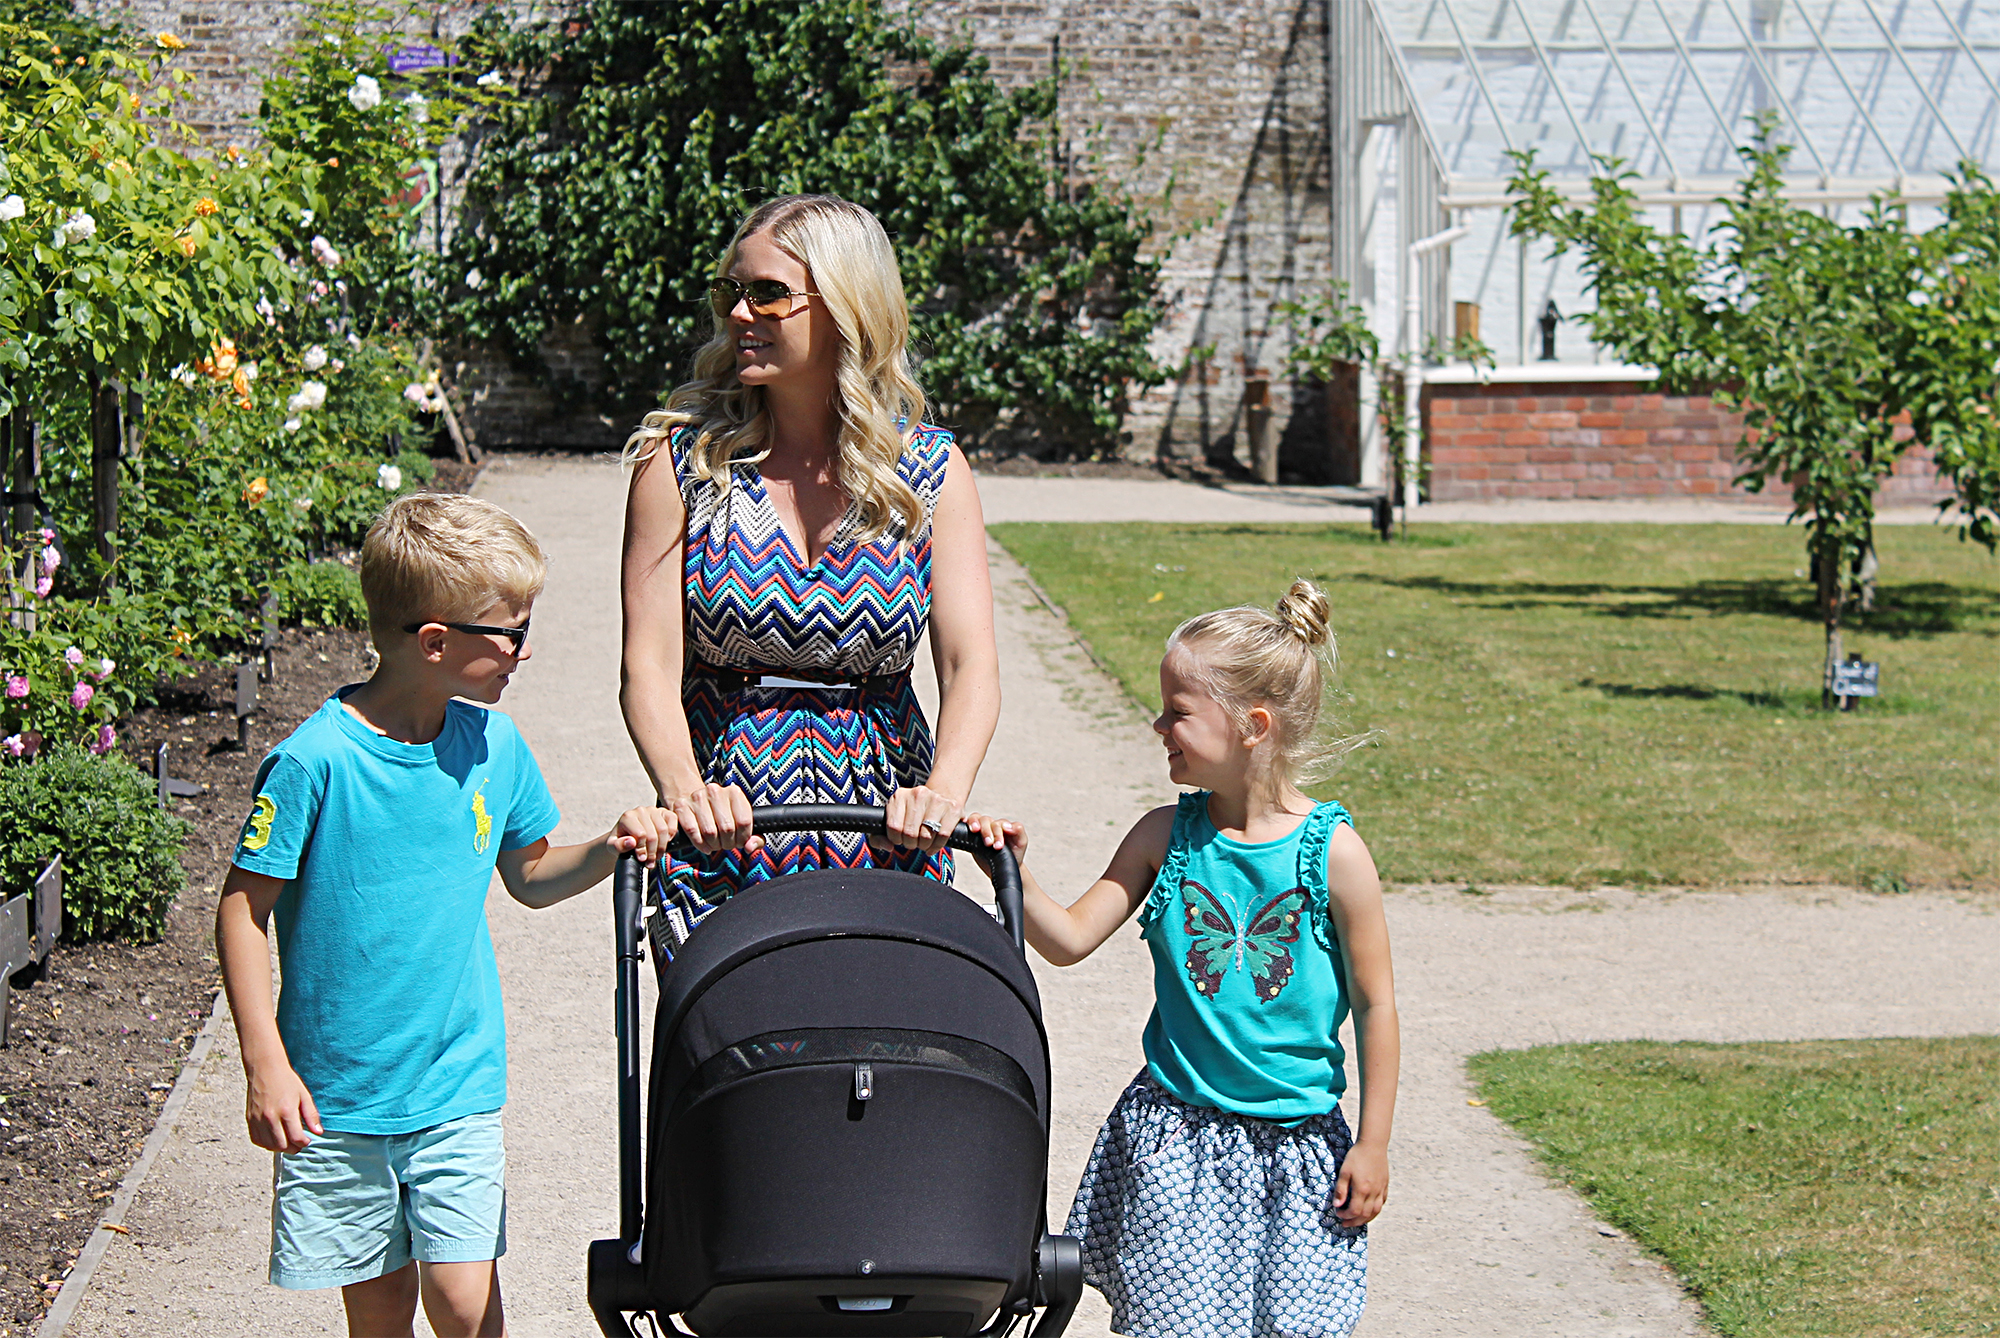 A woman wearing a patterned dress is walking in a park with 2 children walking beside her and pushing a black pram